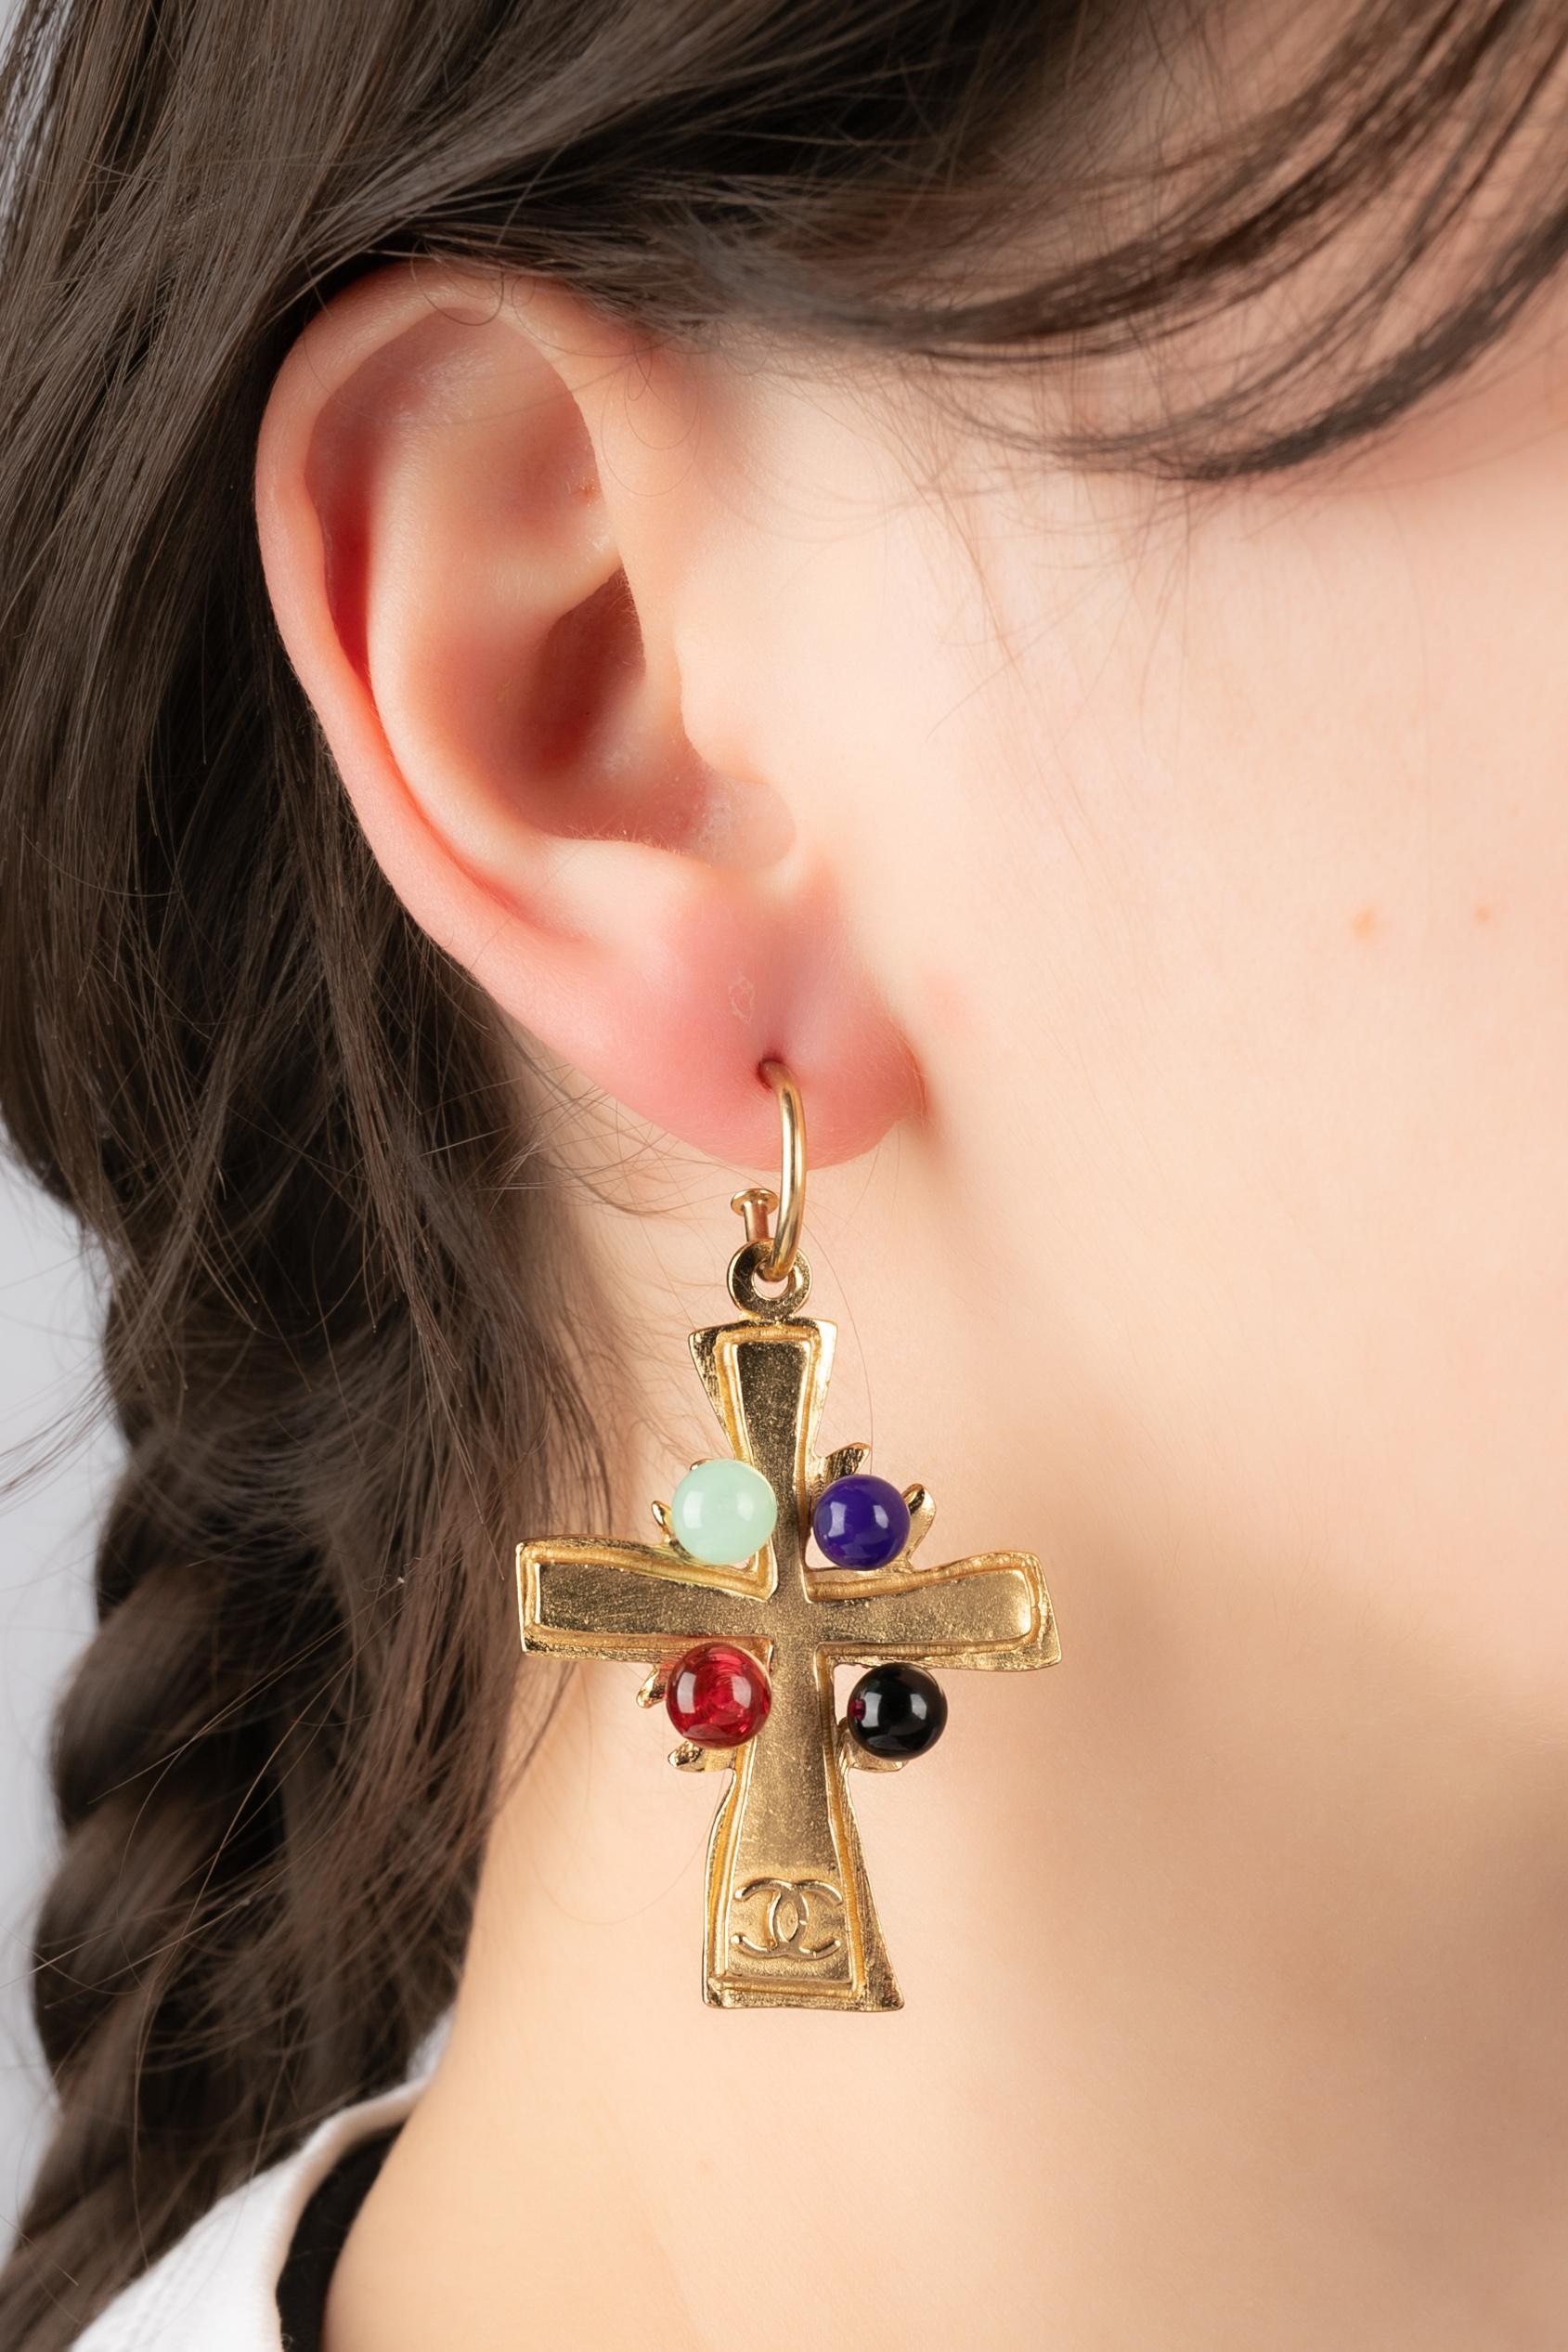 CHANEL - (Made in France) Golden metal cross earrings with colored glass pearls. 2003 Fall-Winter Collection.

Condition:
Very good condition

Dimensions:
Length: 5.5 cm

BOB247